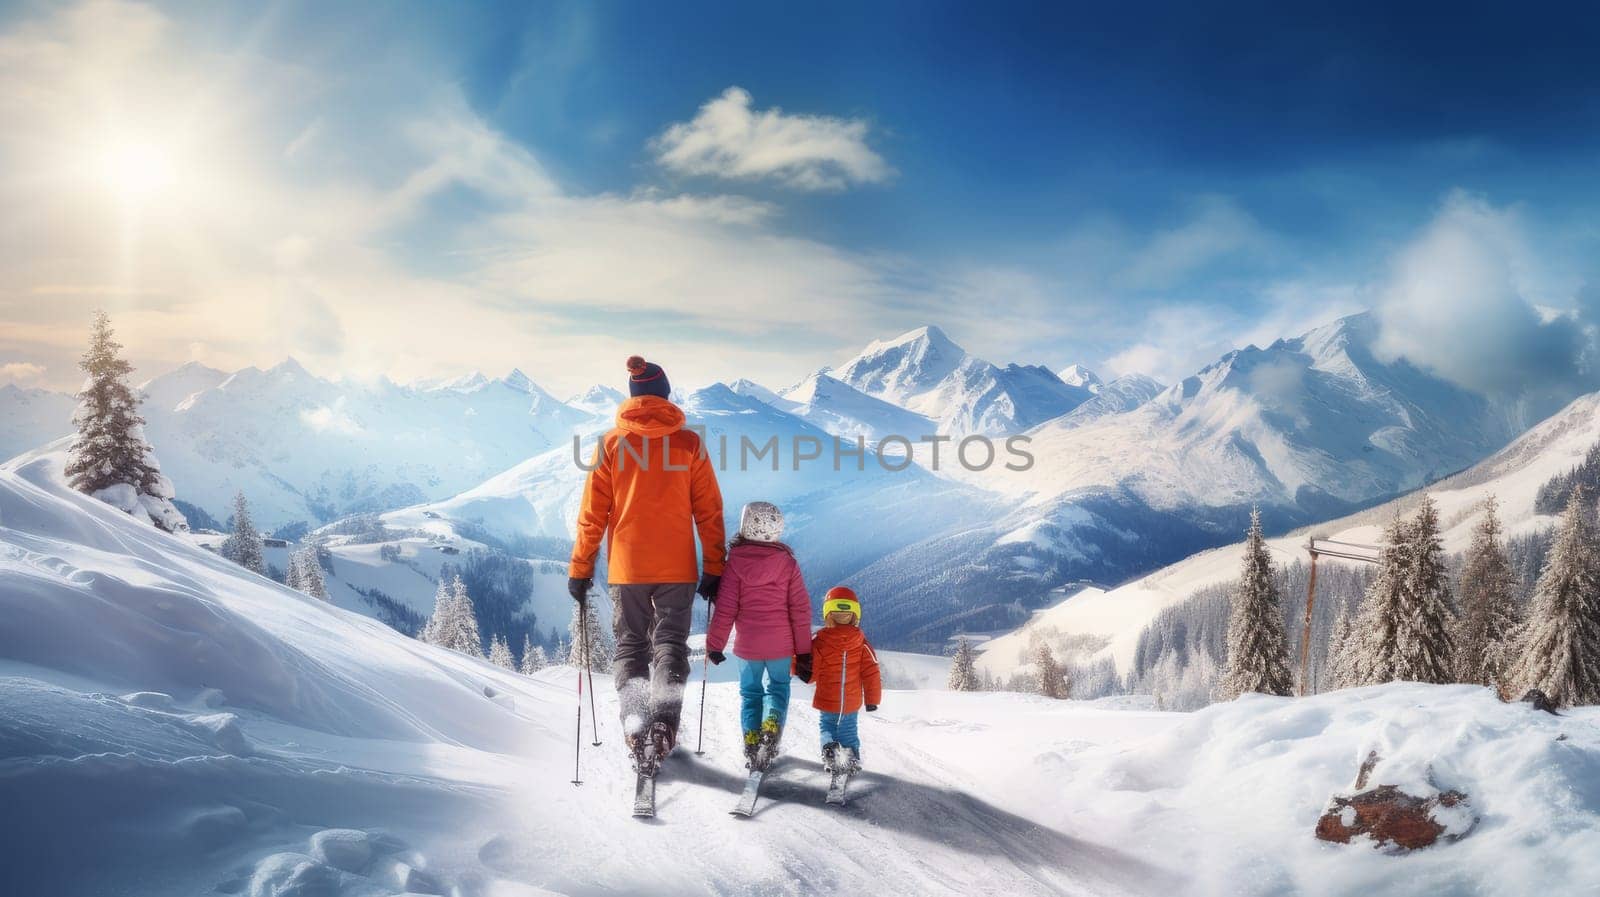 Happy mother with two children walk along snow-capped mountains with a beautiful landscape at a ski resort, during winter holidays. Concept of traveling around the world, recreation winter sports vacations, tourism in the mountains and unusual places